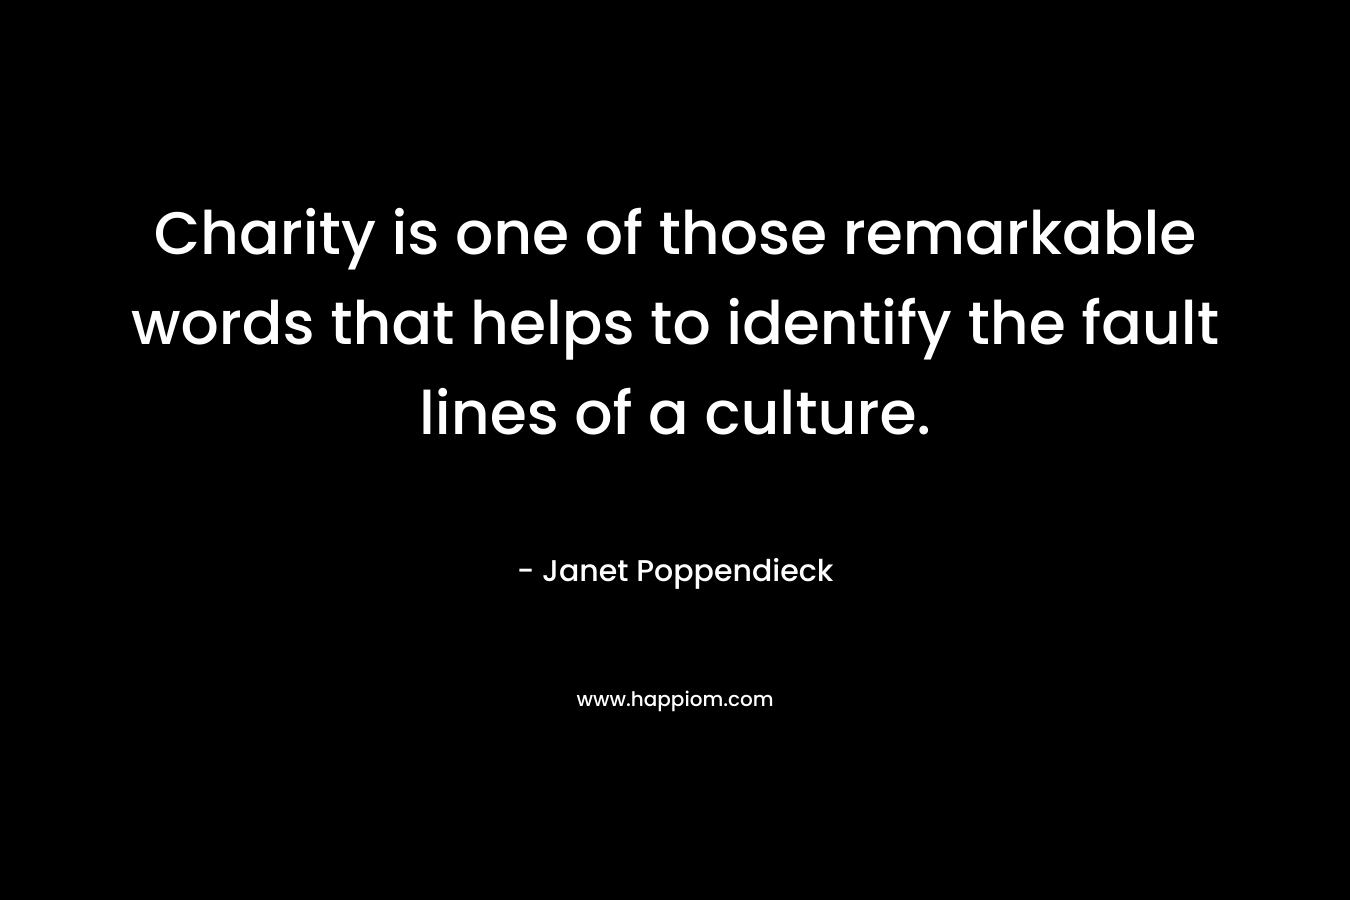 Charity is one of those remarkable words that helps to identify the fault lines of a culture. – Janet Poppendieck